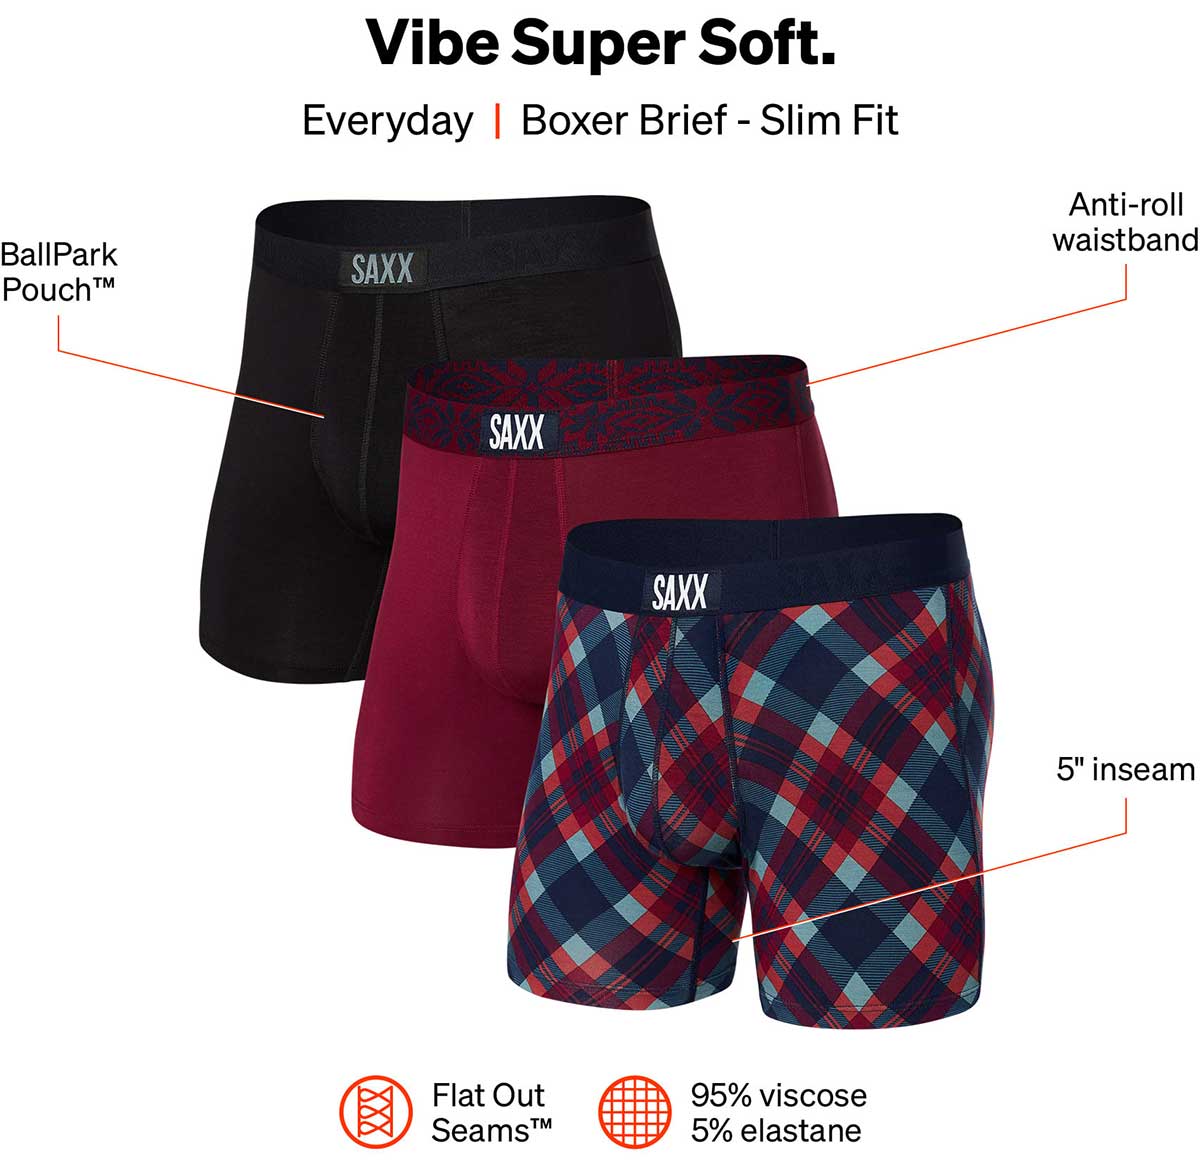 SAXX Vibe Super Soft Boxer Brief 3 Pack Overview